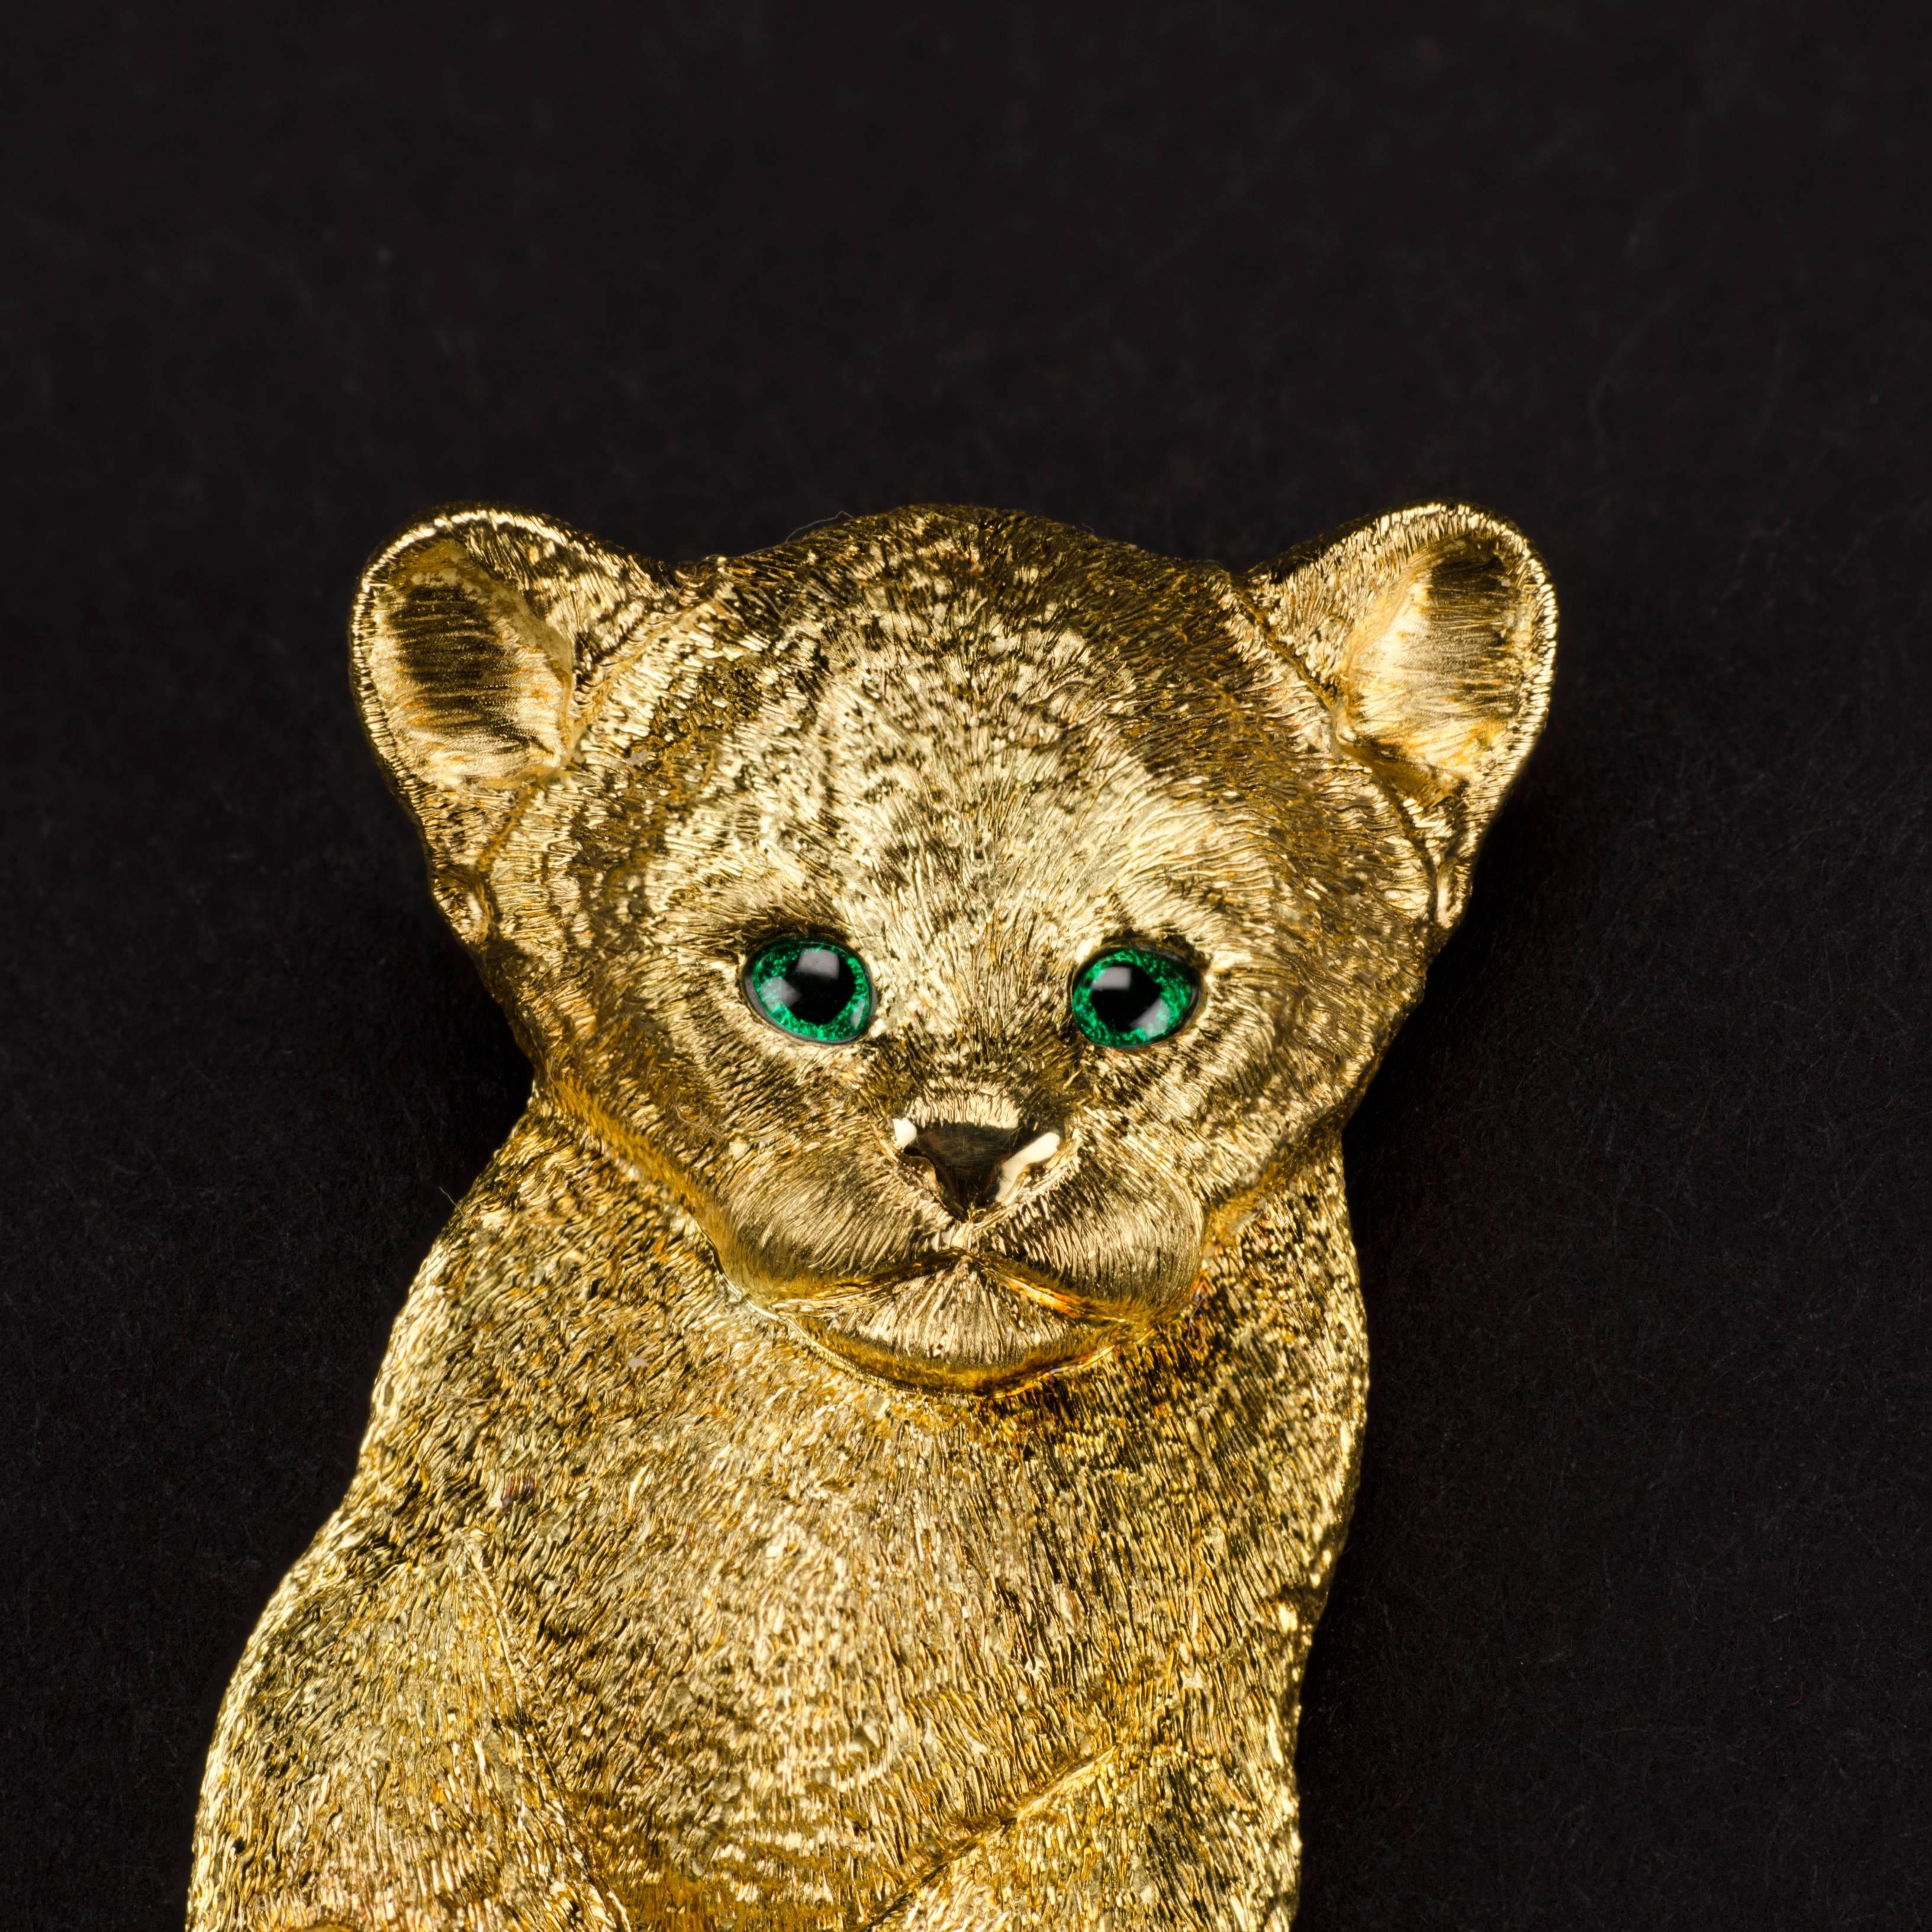 Contemporary 18 Carat Yellow Gold Lion Cub Brooch or Pendant with a Cushion of Rubies For Sale